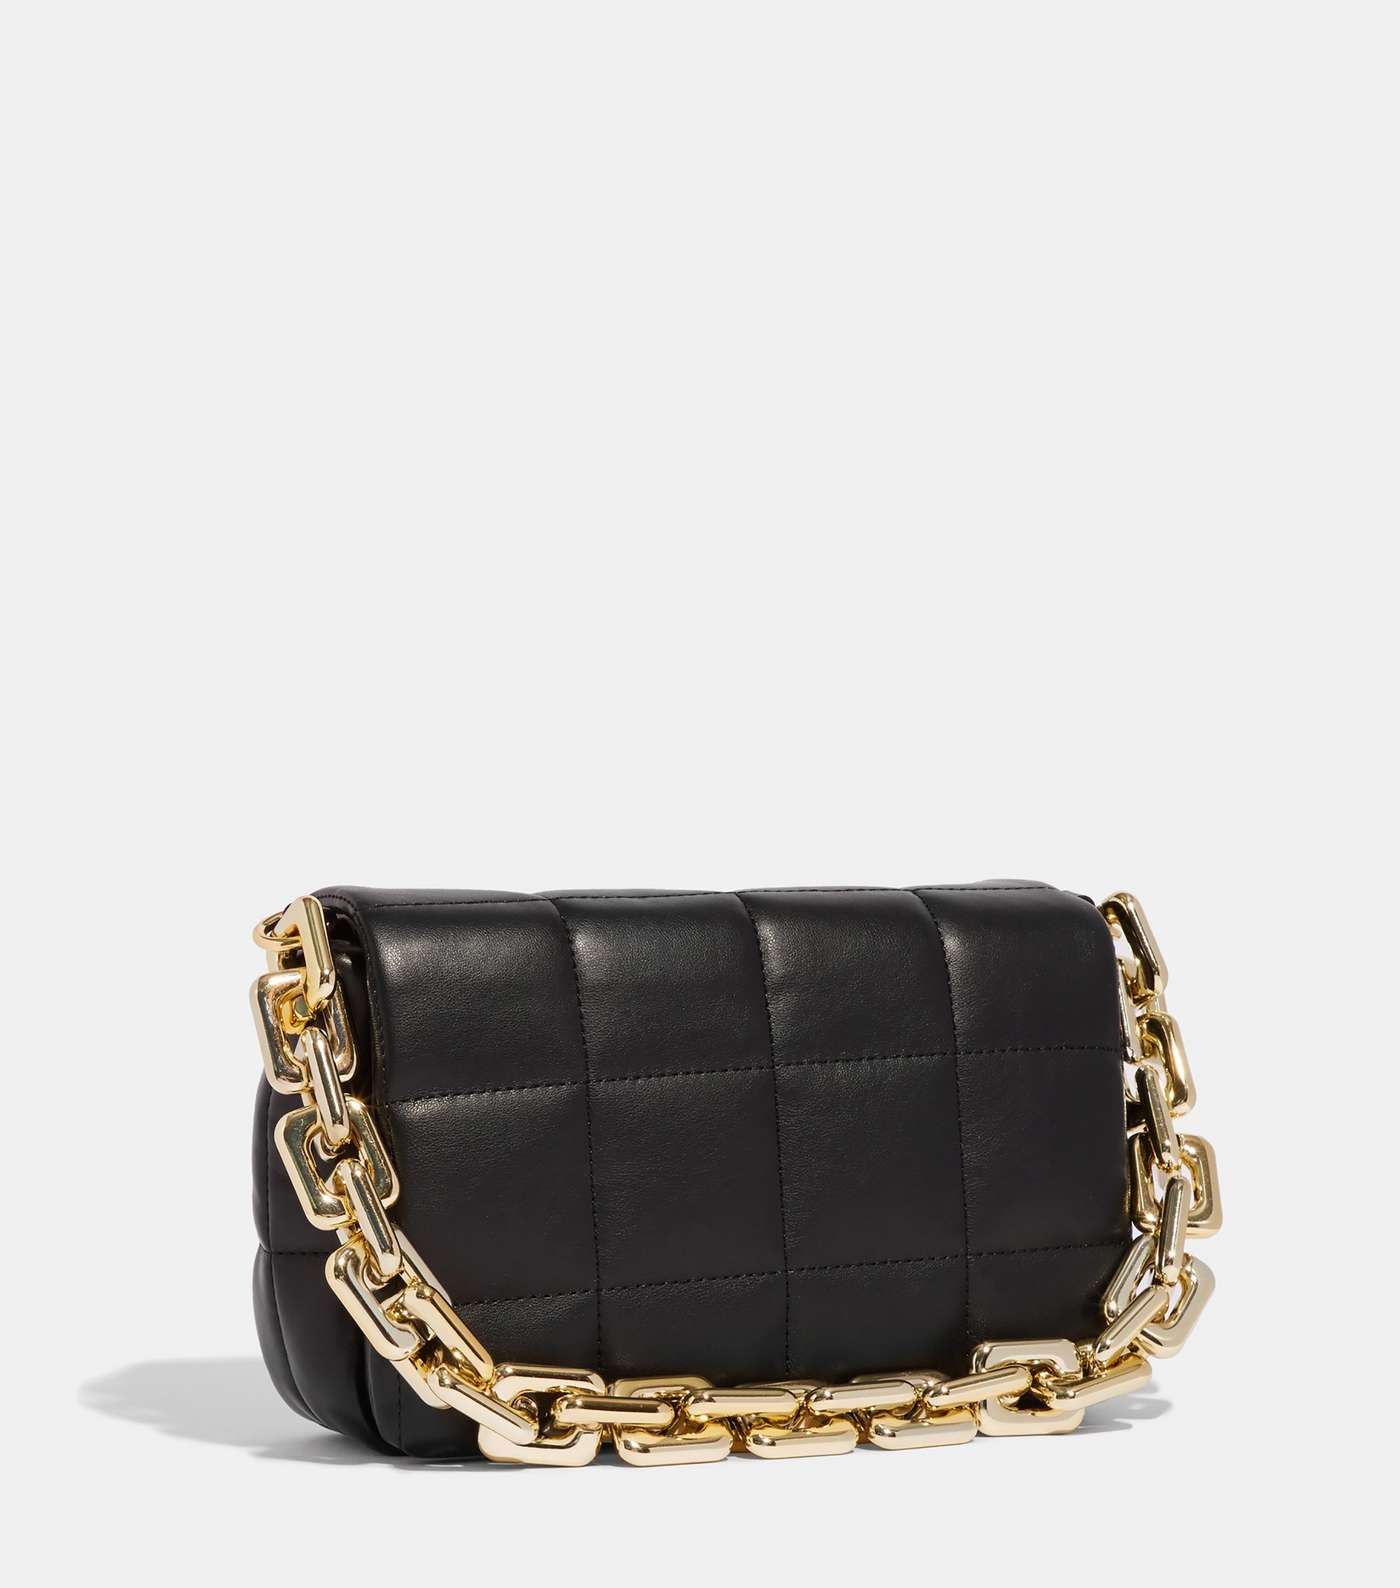 Skinnydip Black Leather-Look Quilted Chain Shoulder Bag Image 2